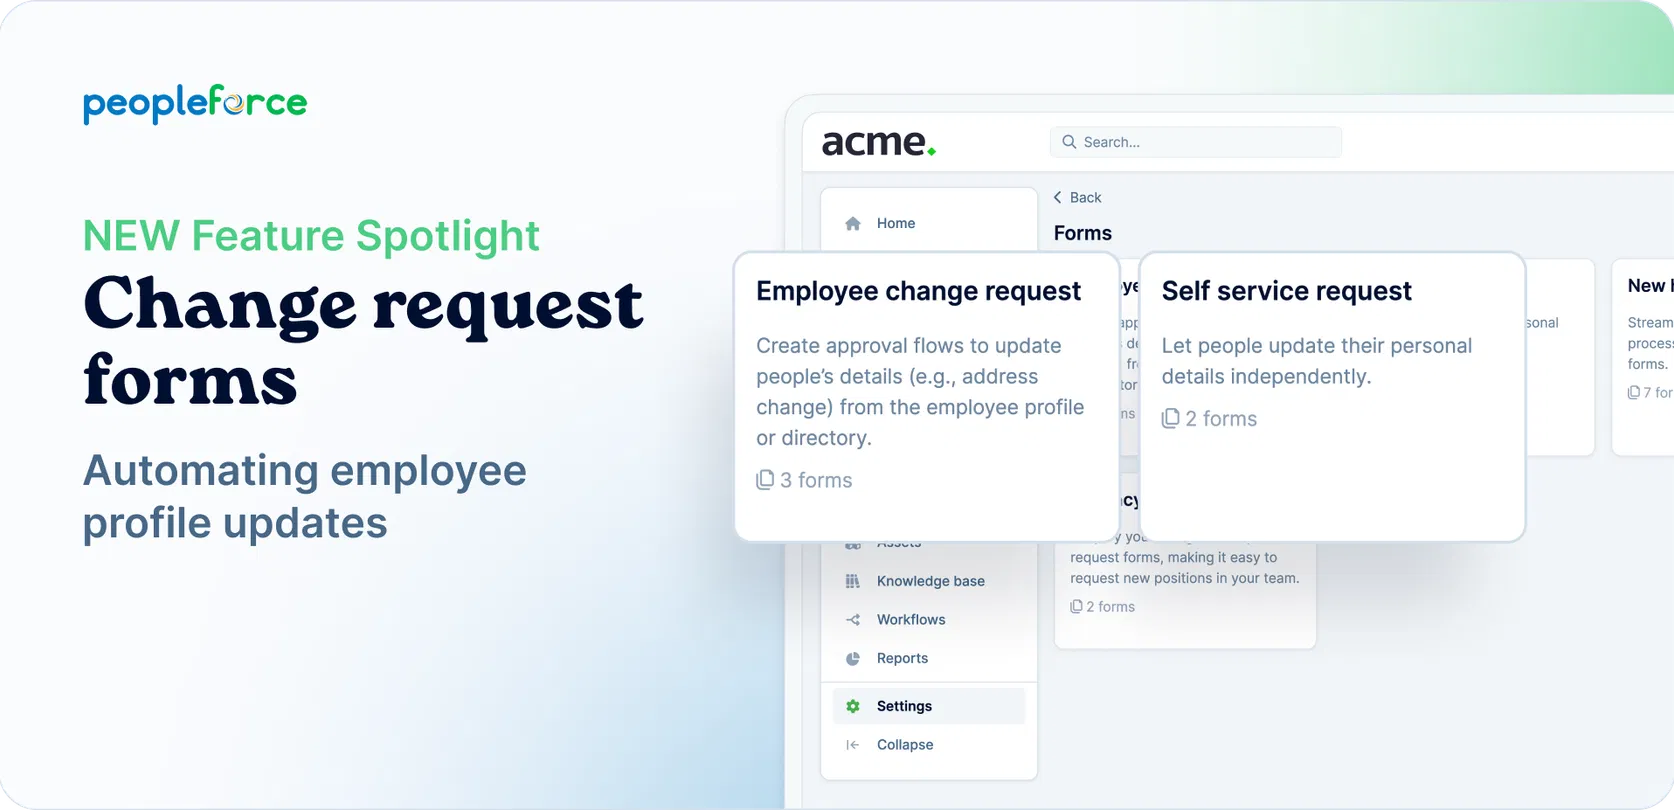 Introducing two new forms for automating employee profile updates